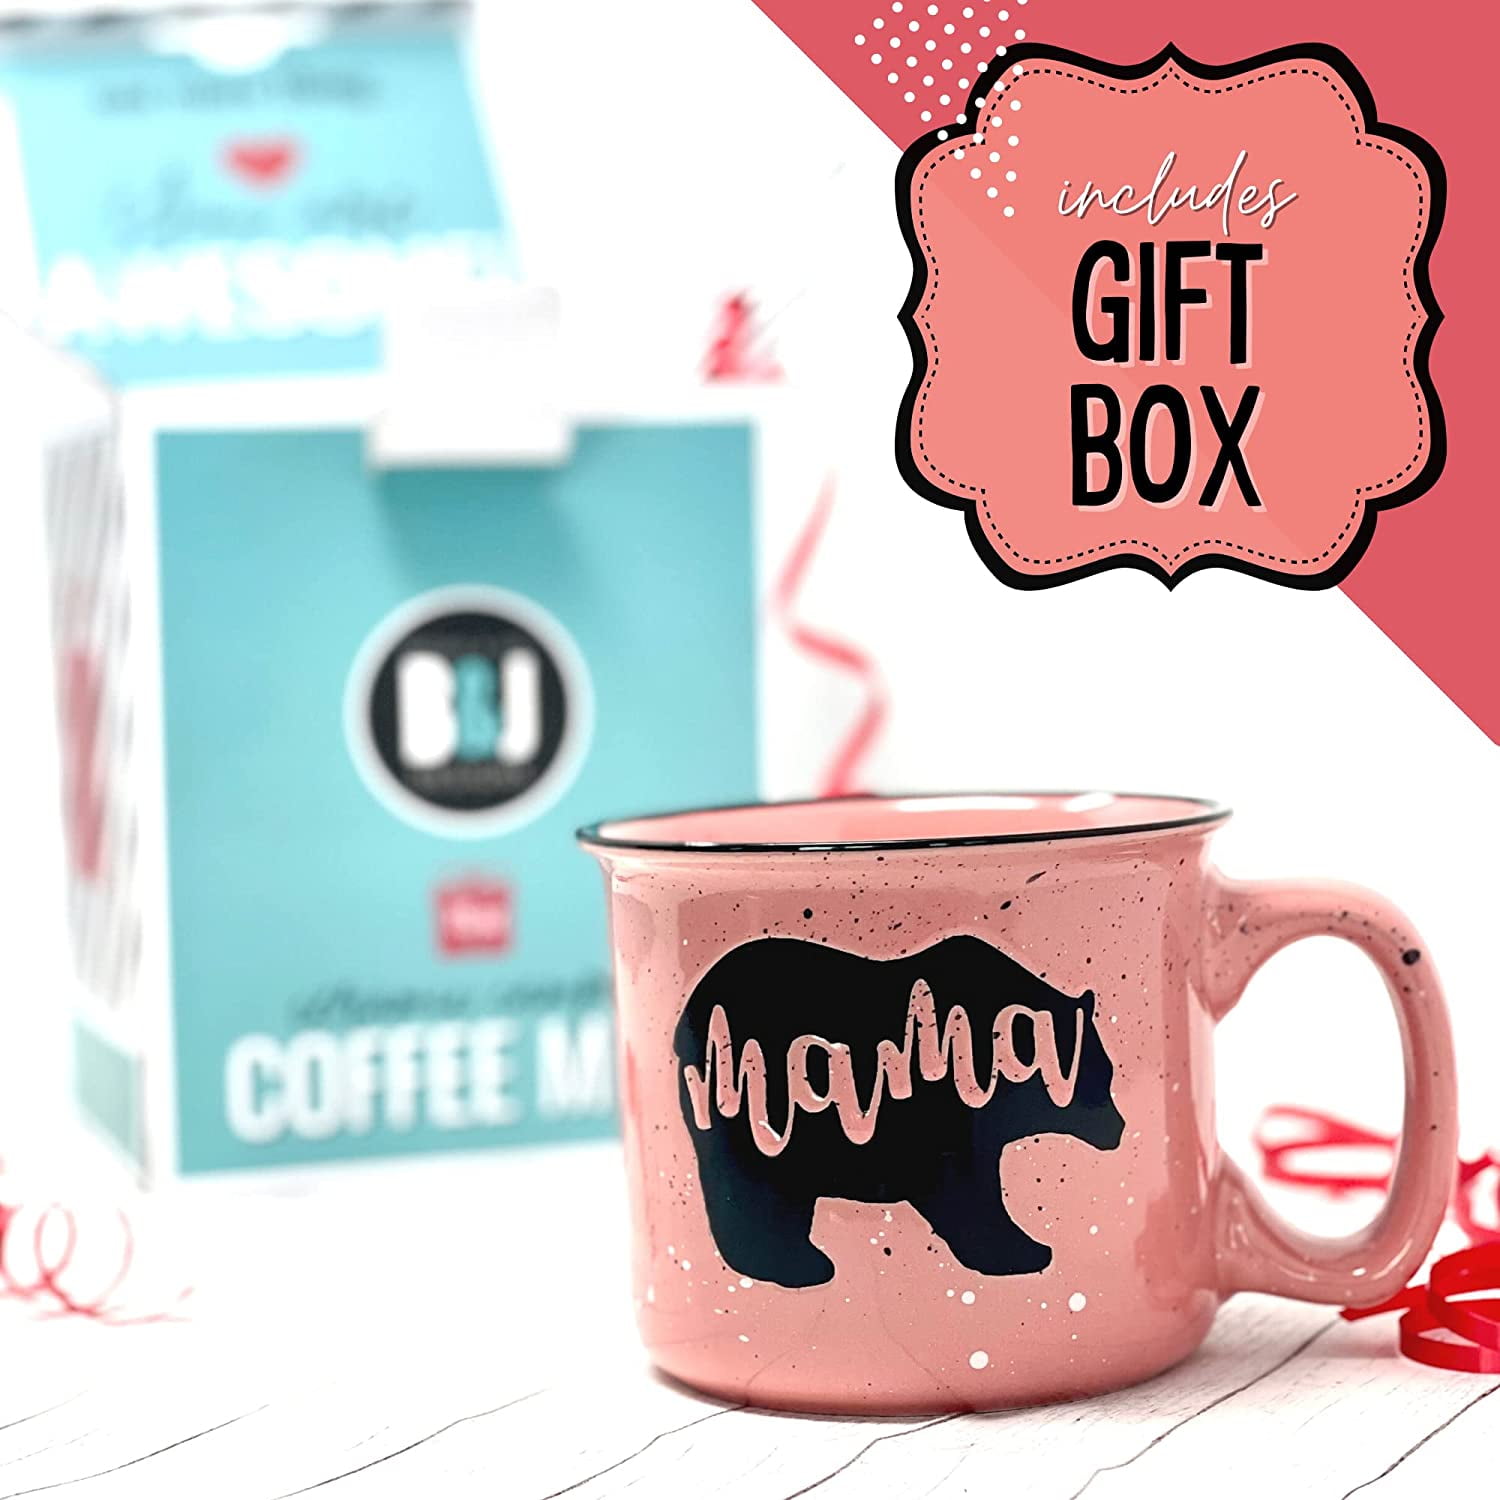 Mama Bear Mug - Unique Coffee Cup for Mom Wife, Funny Happy Birthday Gifts for Women, Cute Custom Mothers Day Mugs for Best Friend, Up to 6 Cubs, Size